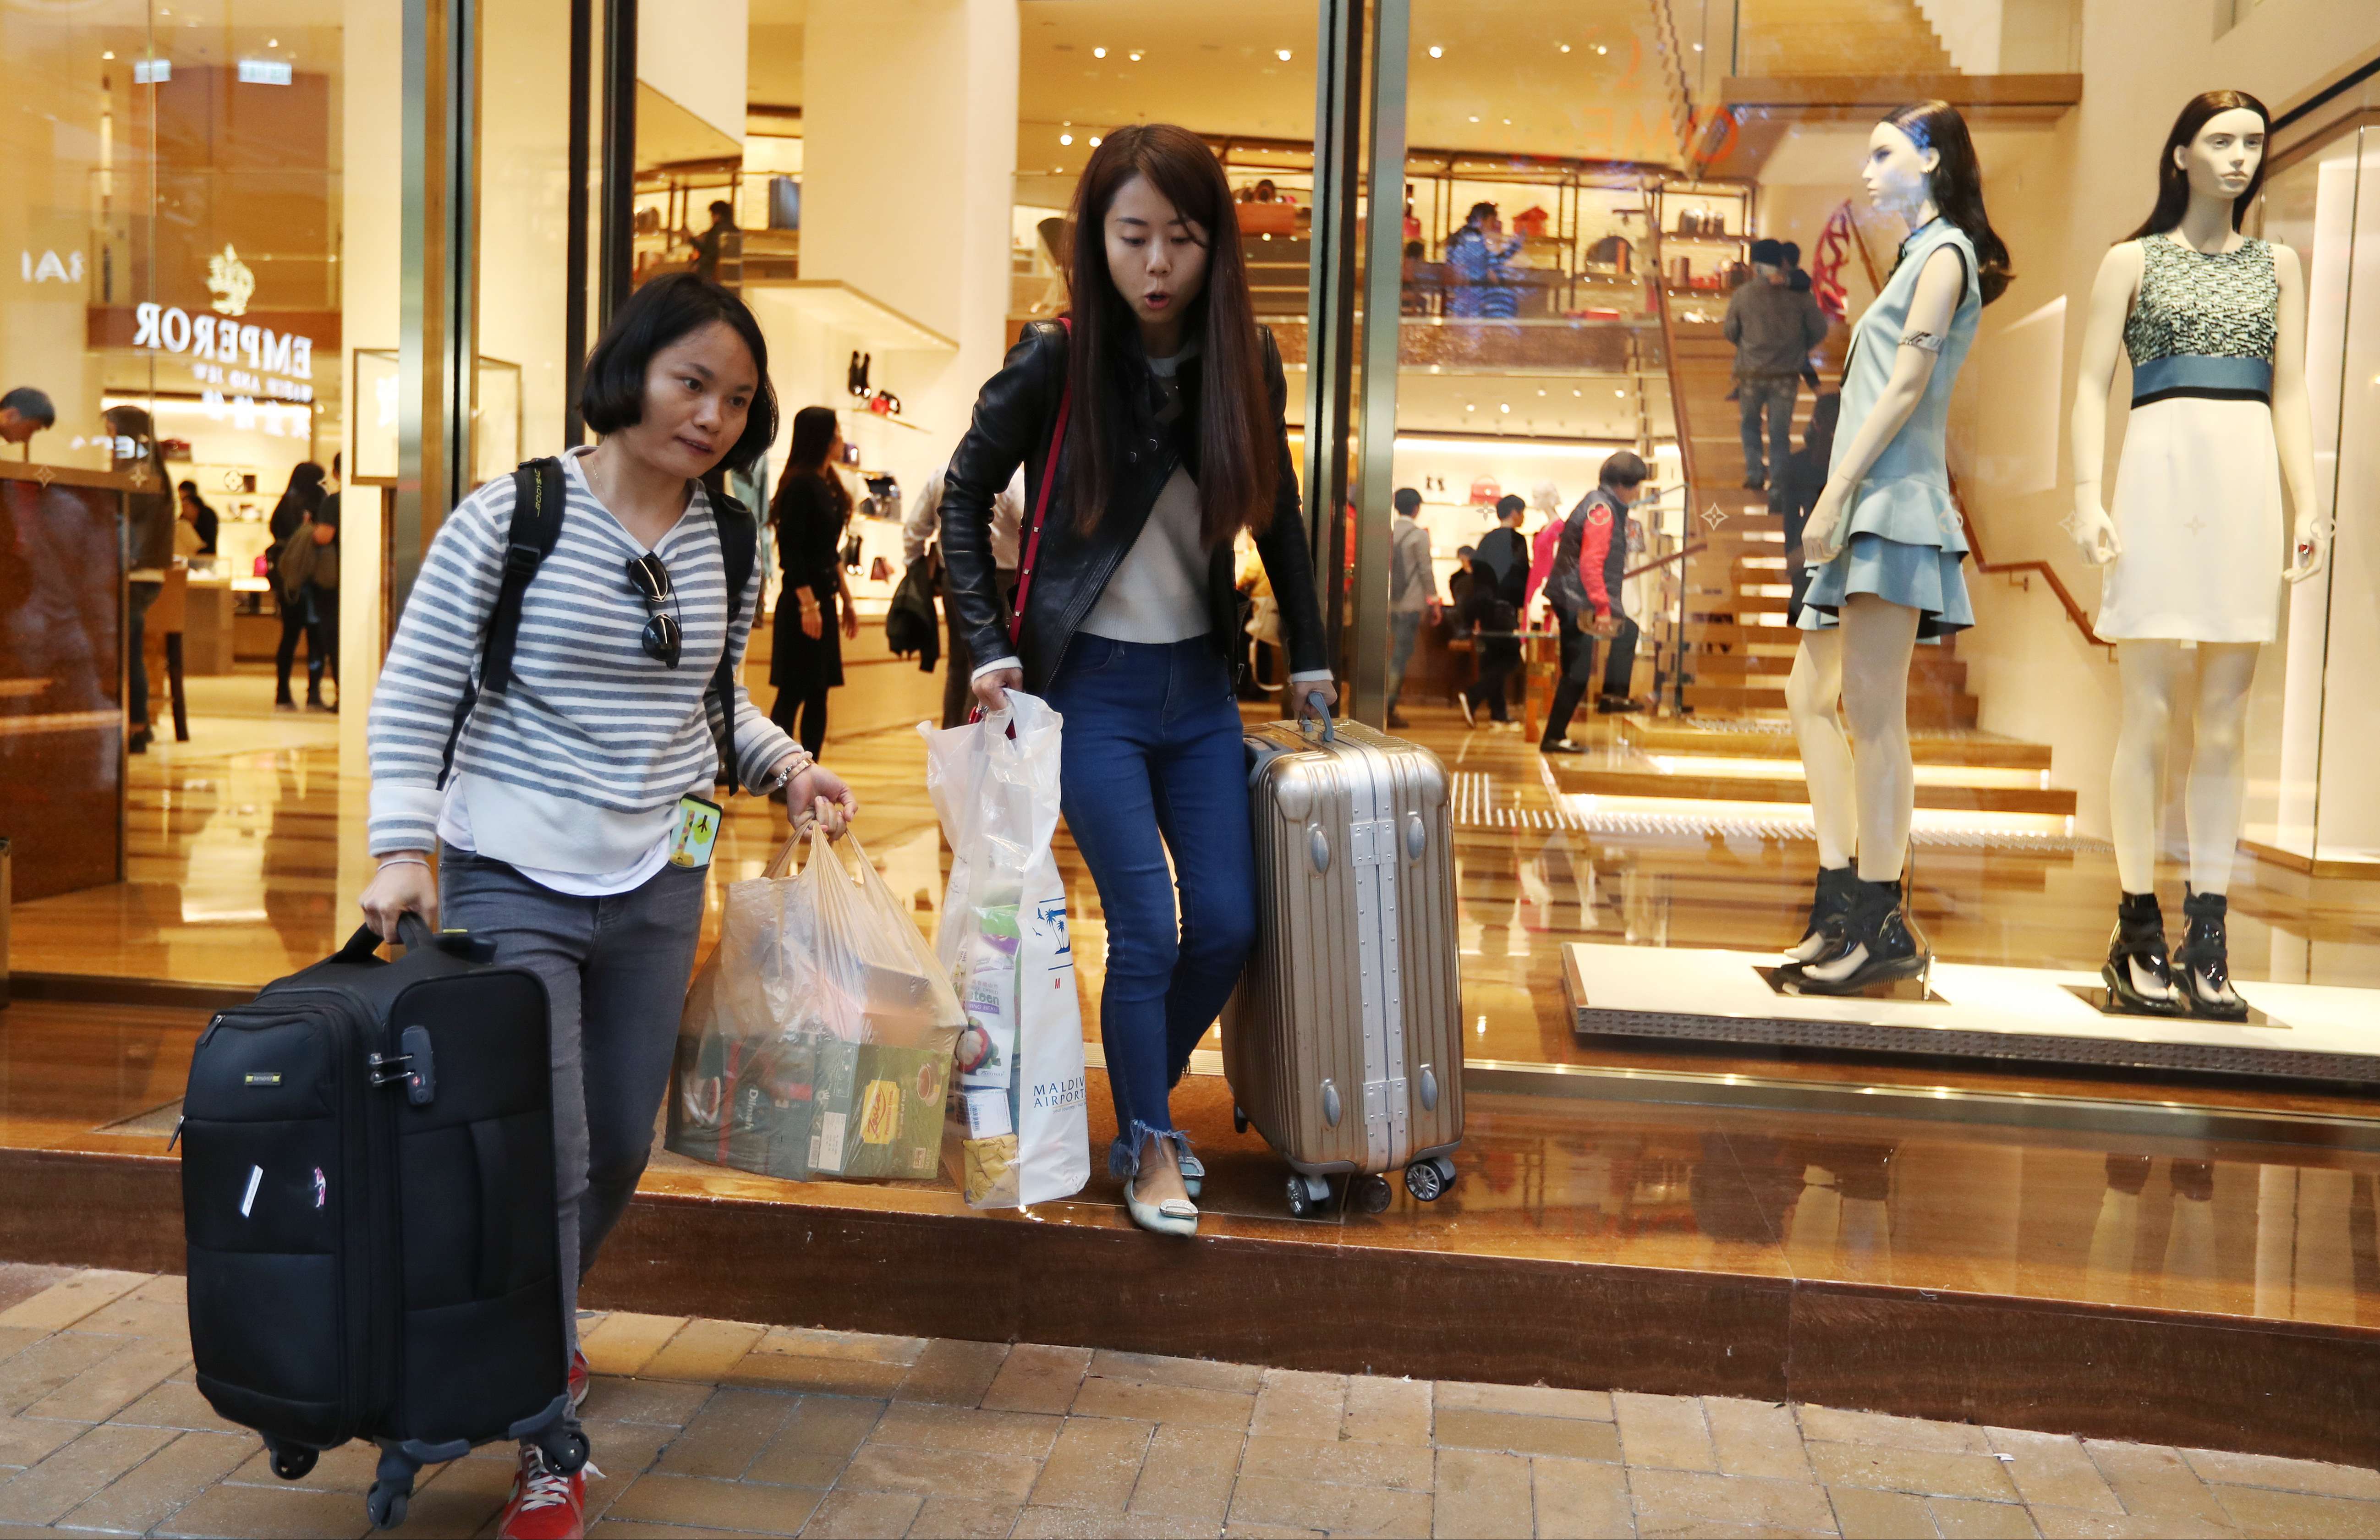 The poor growth showing last year was partly due to a decline in tourist arrivals. Photo: Nora Tam